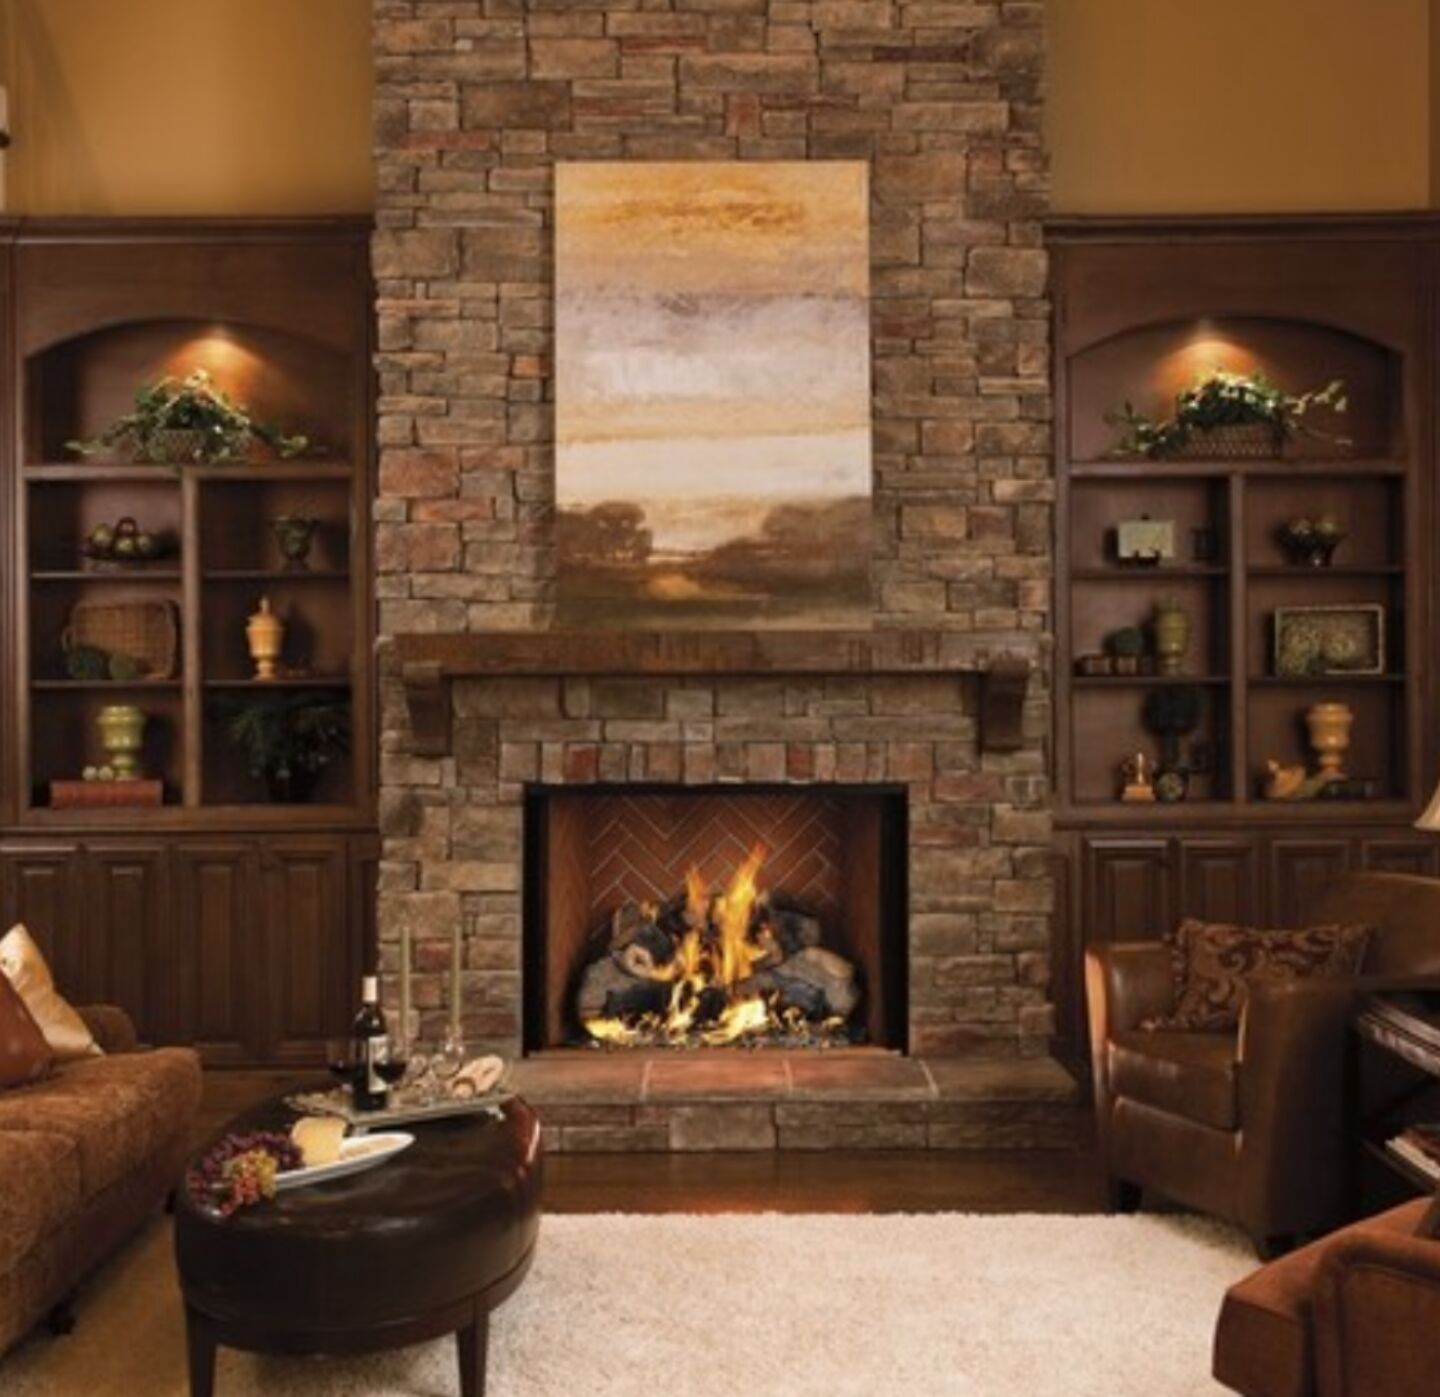 What to Put On Either Side Of Fireplace New Pin by Melissa Phillips On House Ideas